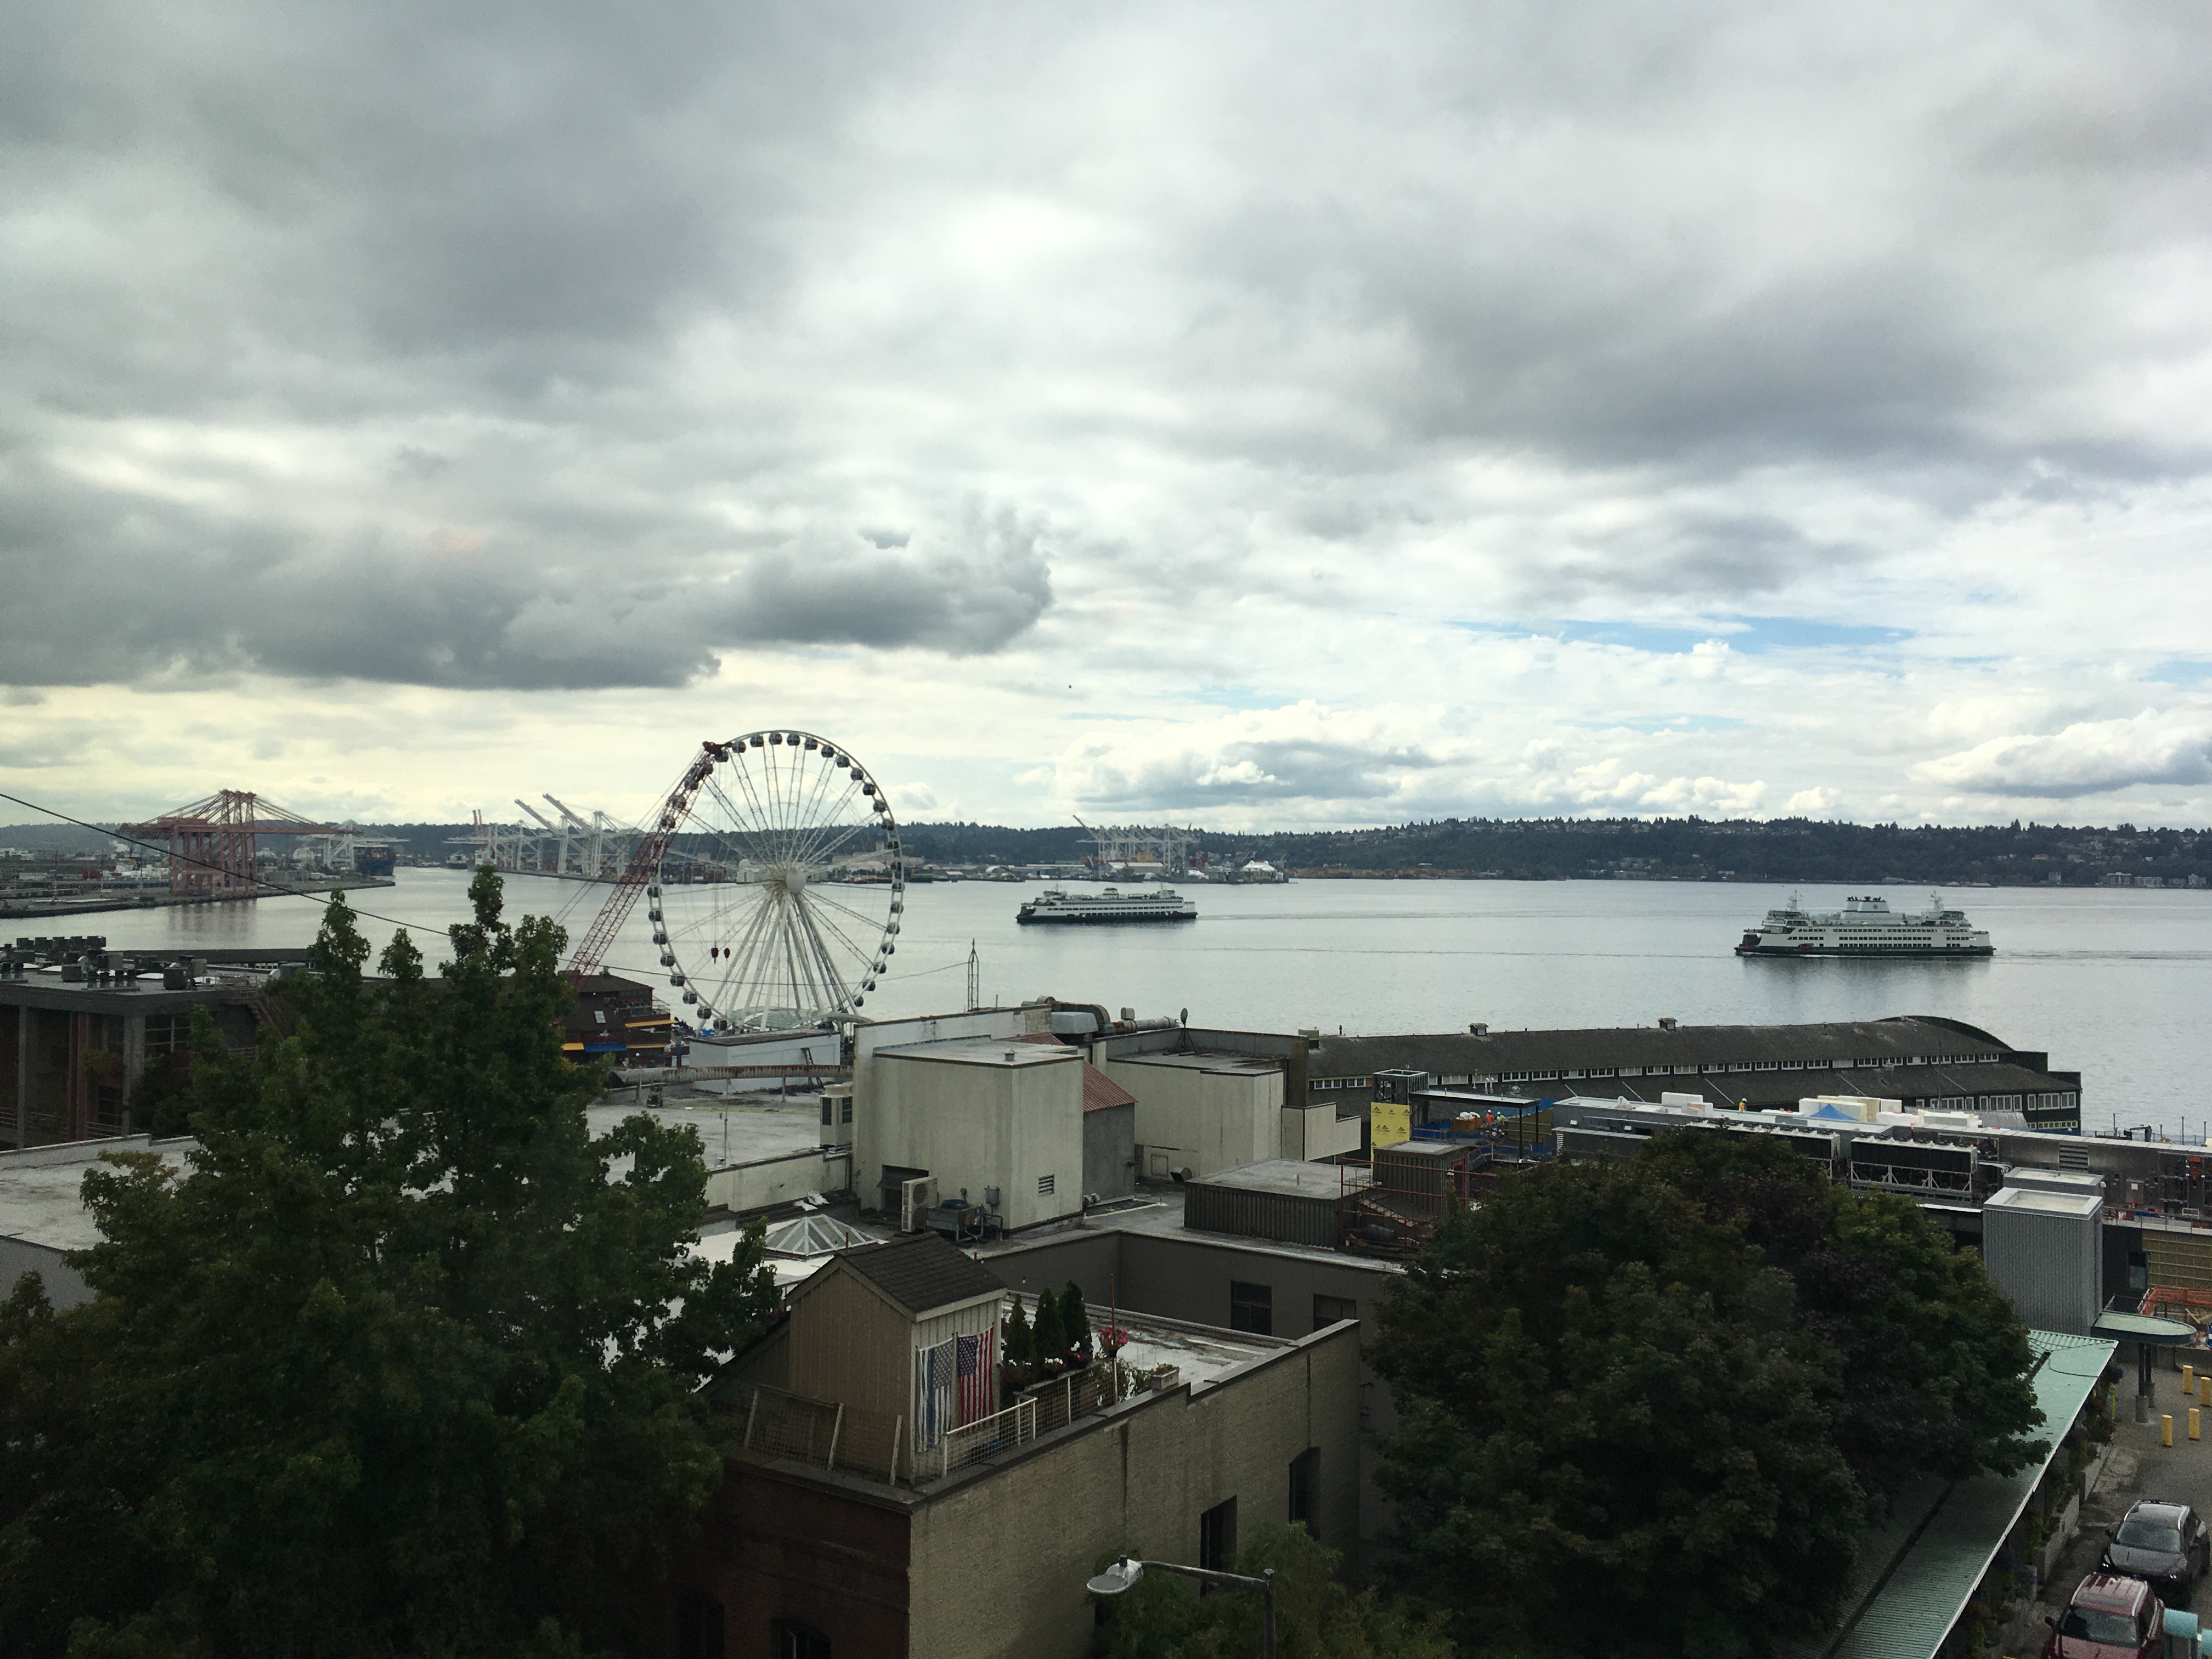 Cloudy, grey day looking out over Seattle harbour, with ferris wheel on the pier and two ferries approaching the dock